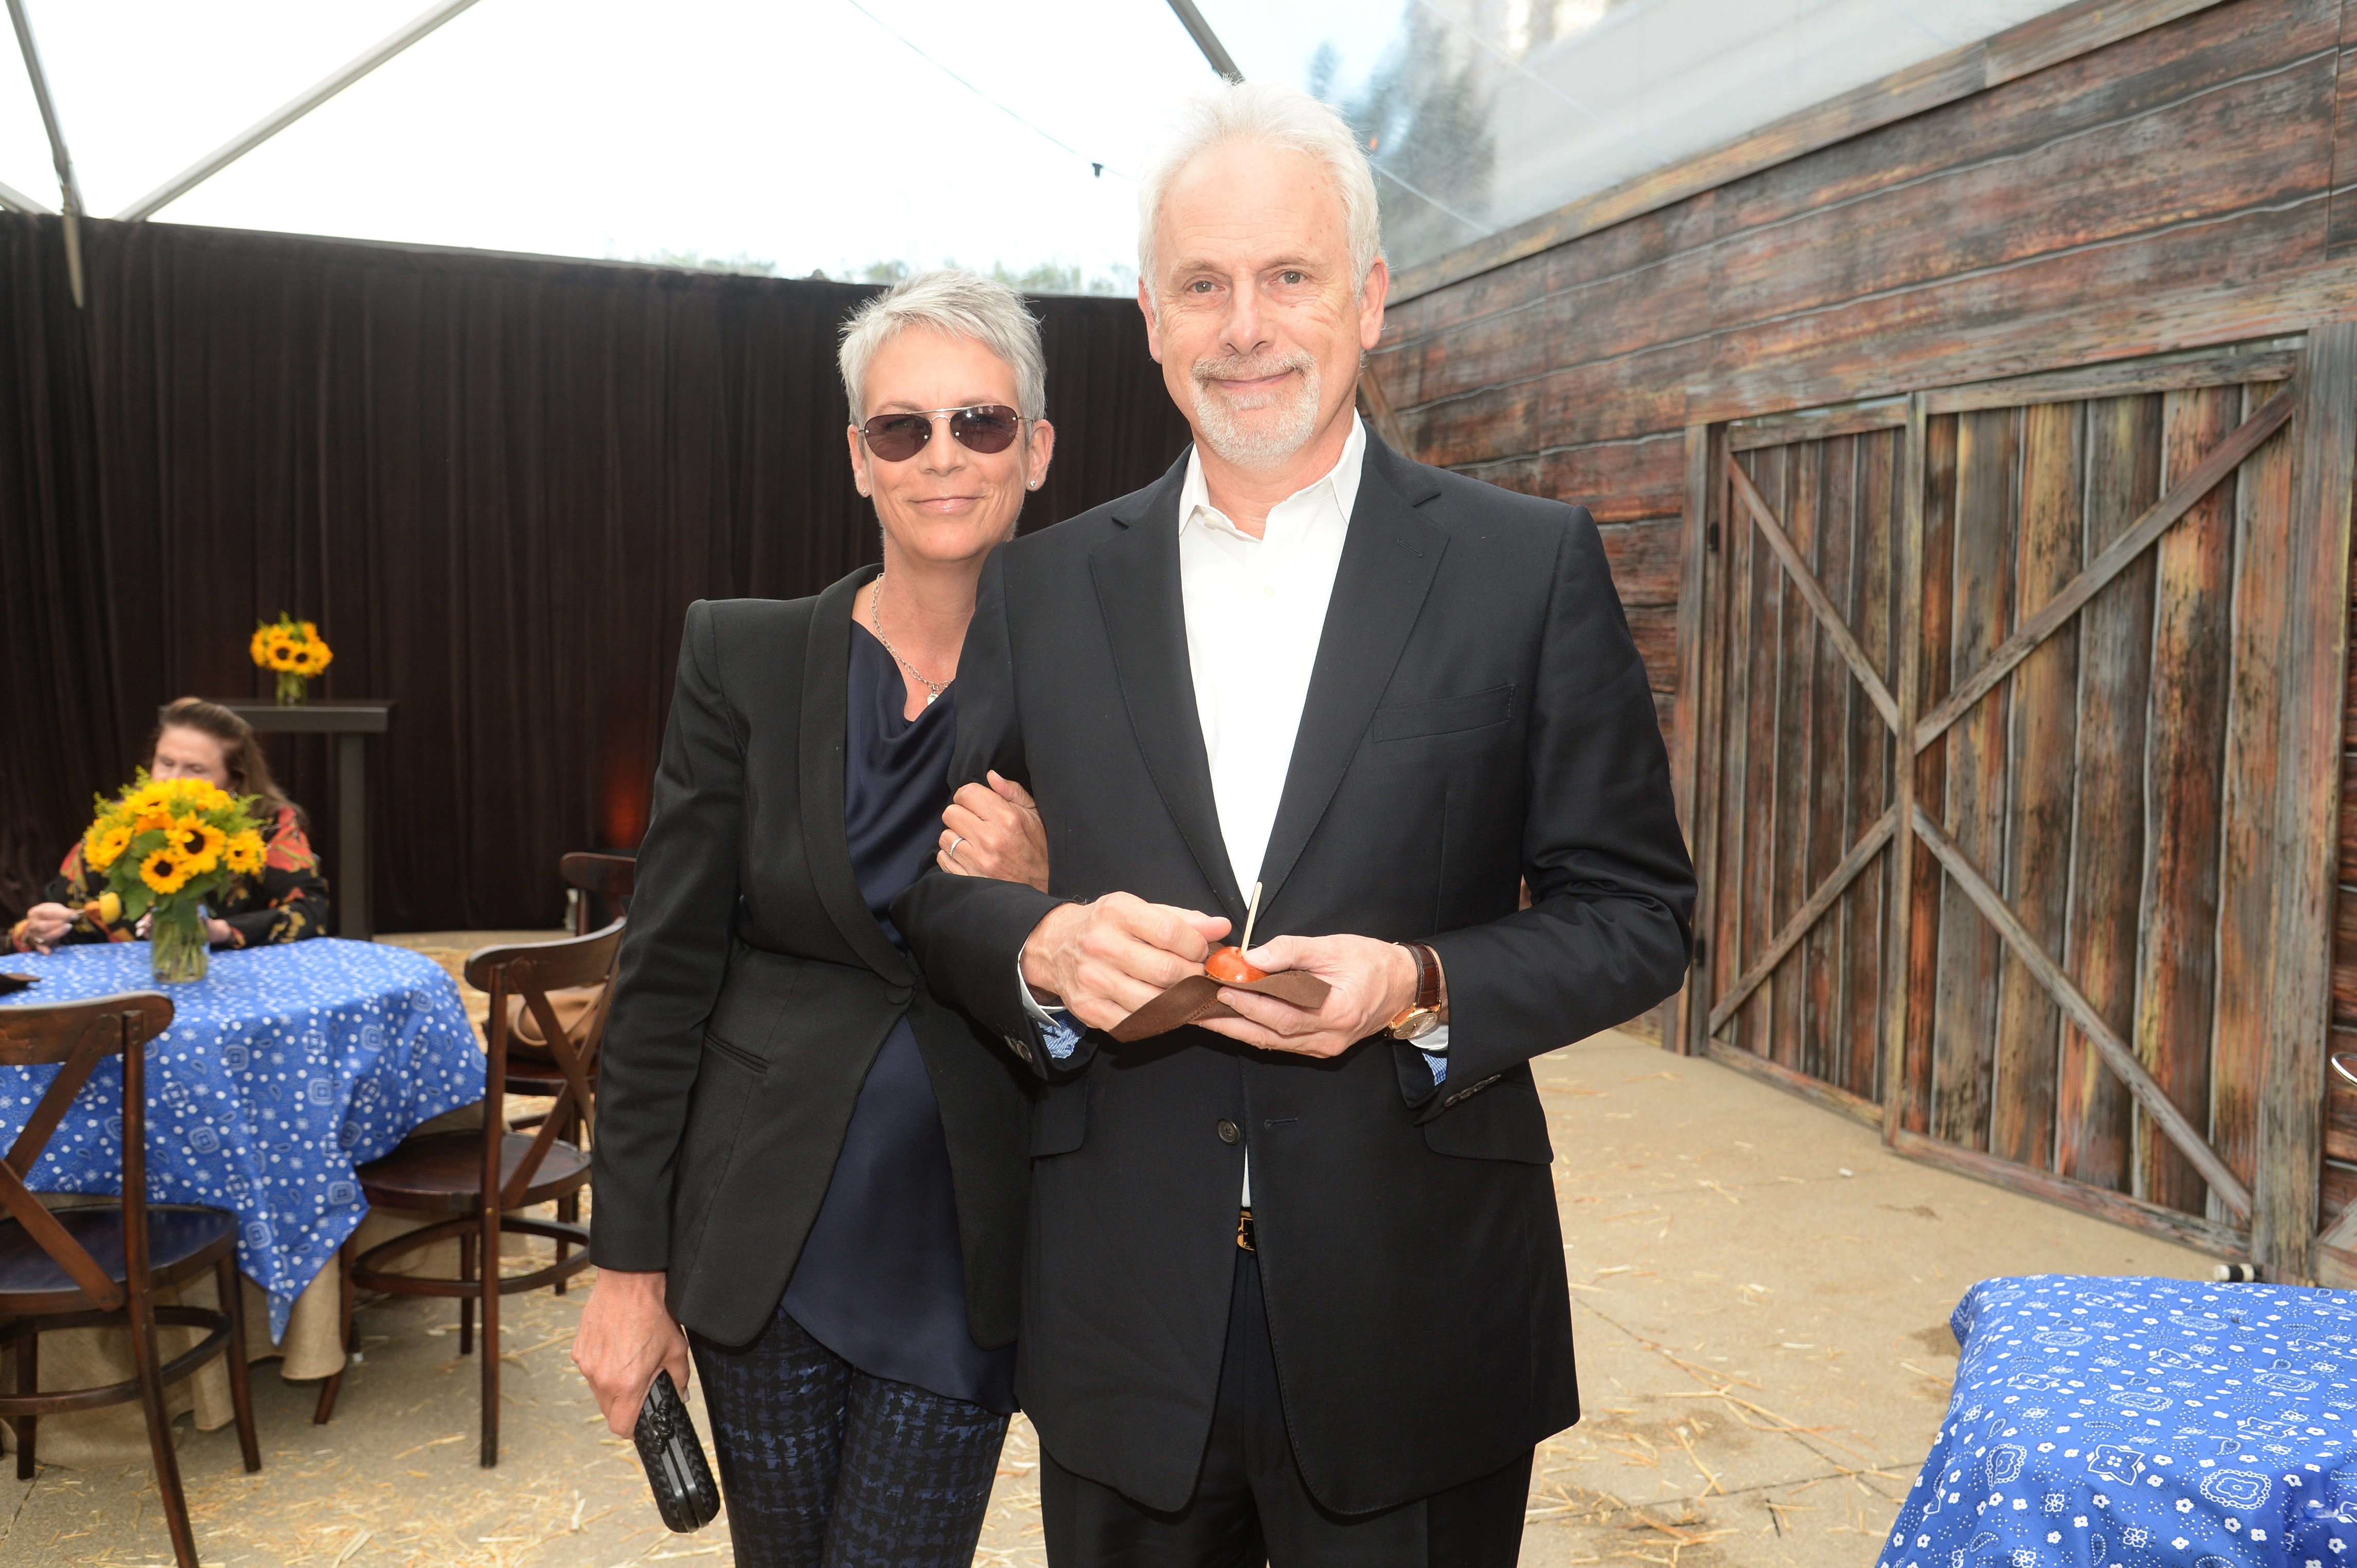 Jamie Lee Curtis and Christopher Guest at the Annenberg Space for Photography Opening Celebration for "Country, Portraits of an American Sound" in Century City, California, May 22, 2014 | Source: Getty Images